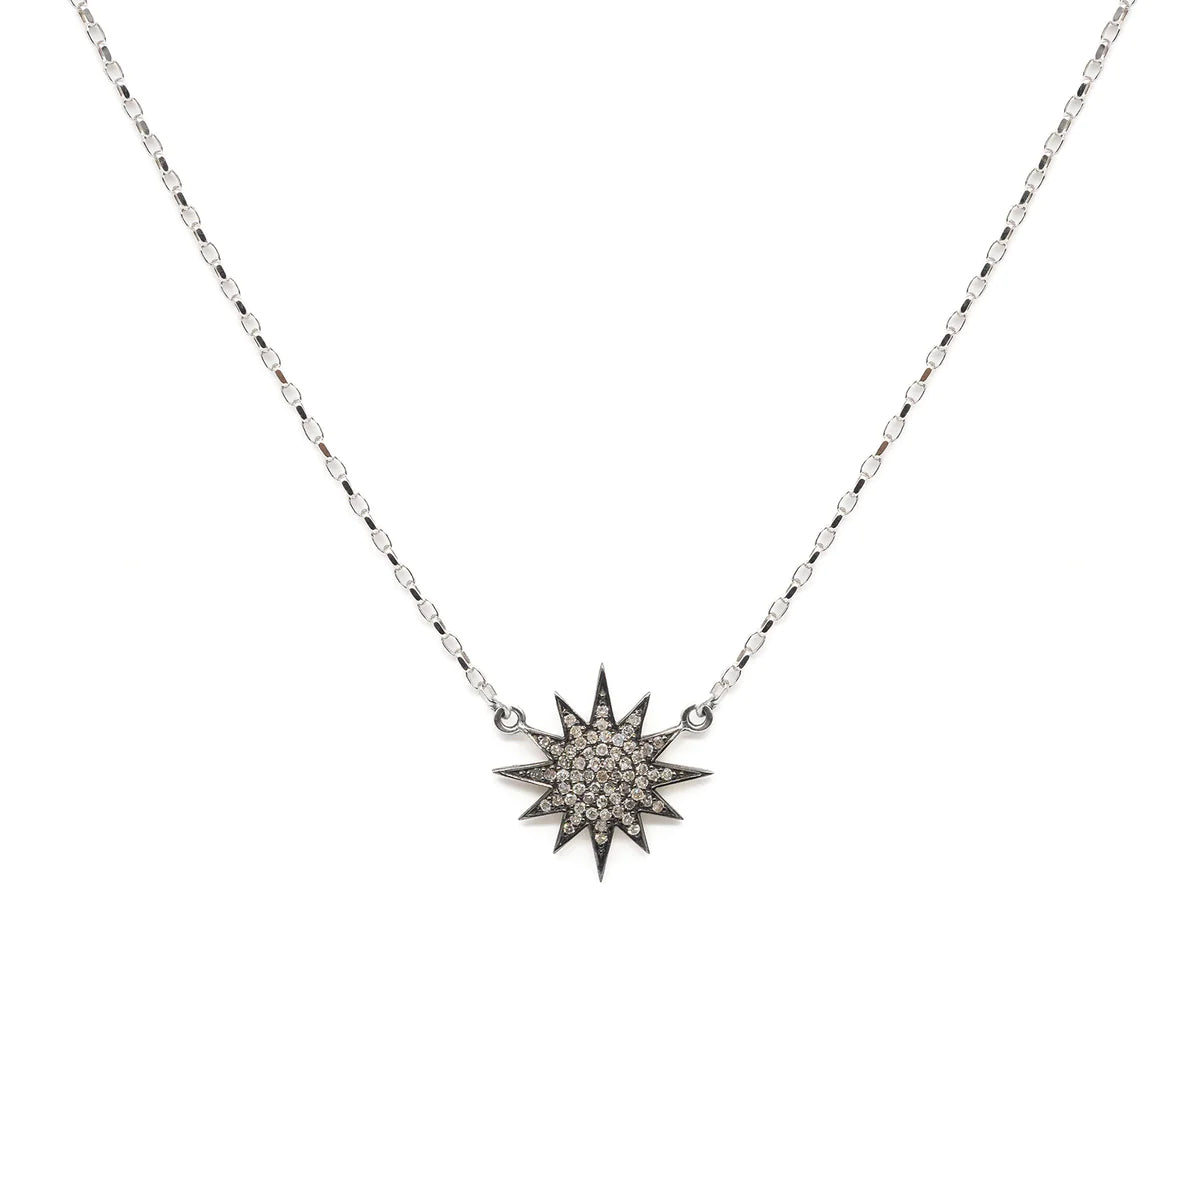 whit-gold-starburst-necklace-product-shot_1200x.webp__PID:a46e45d0-22f5-4602-8d2f-3f8232ced0ac